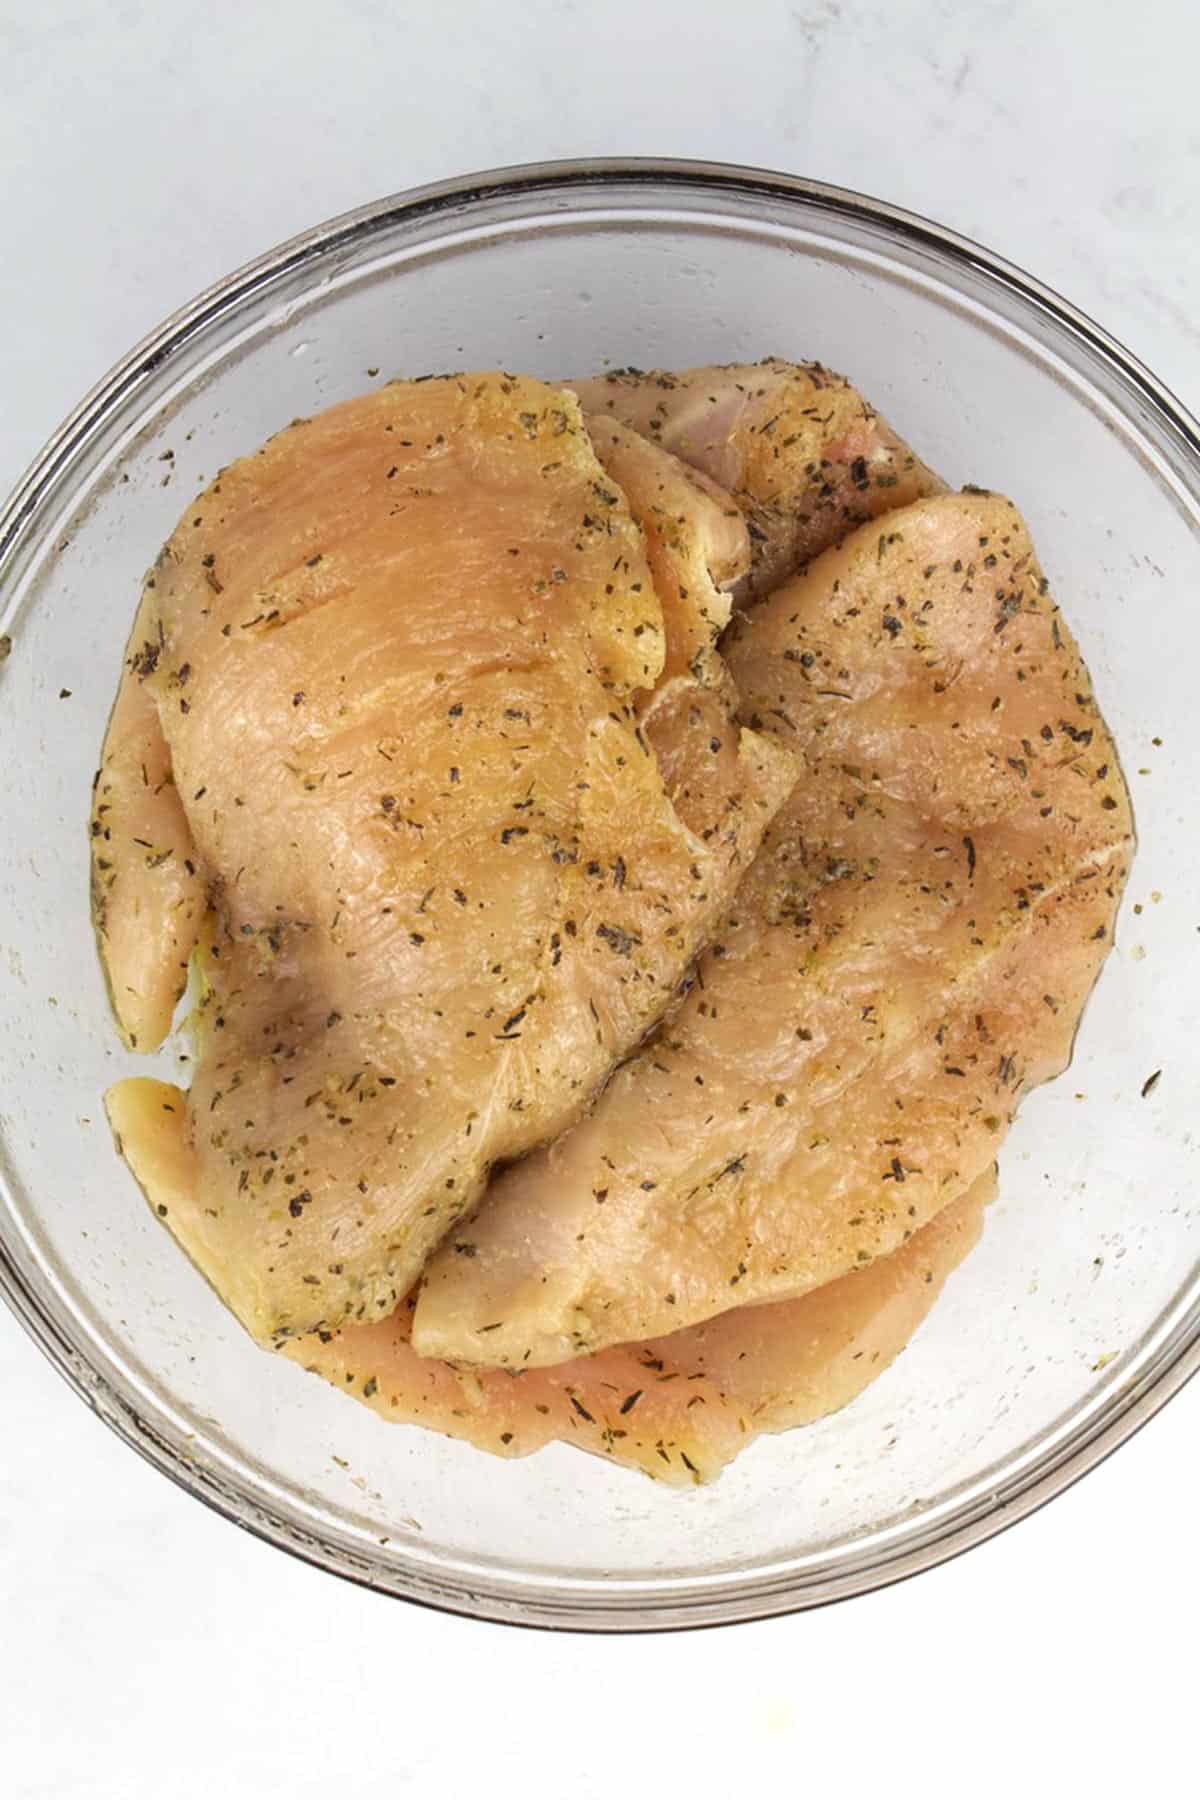 A glass bowl with raw chicken breasts seasoned with dried herbs and olive oil.